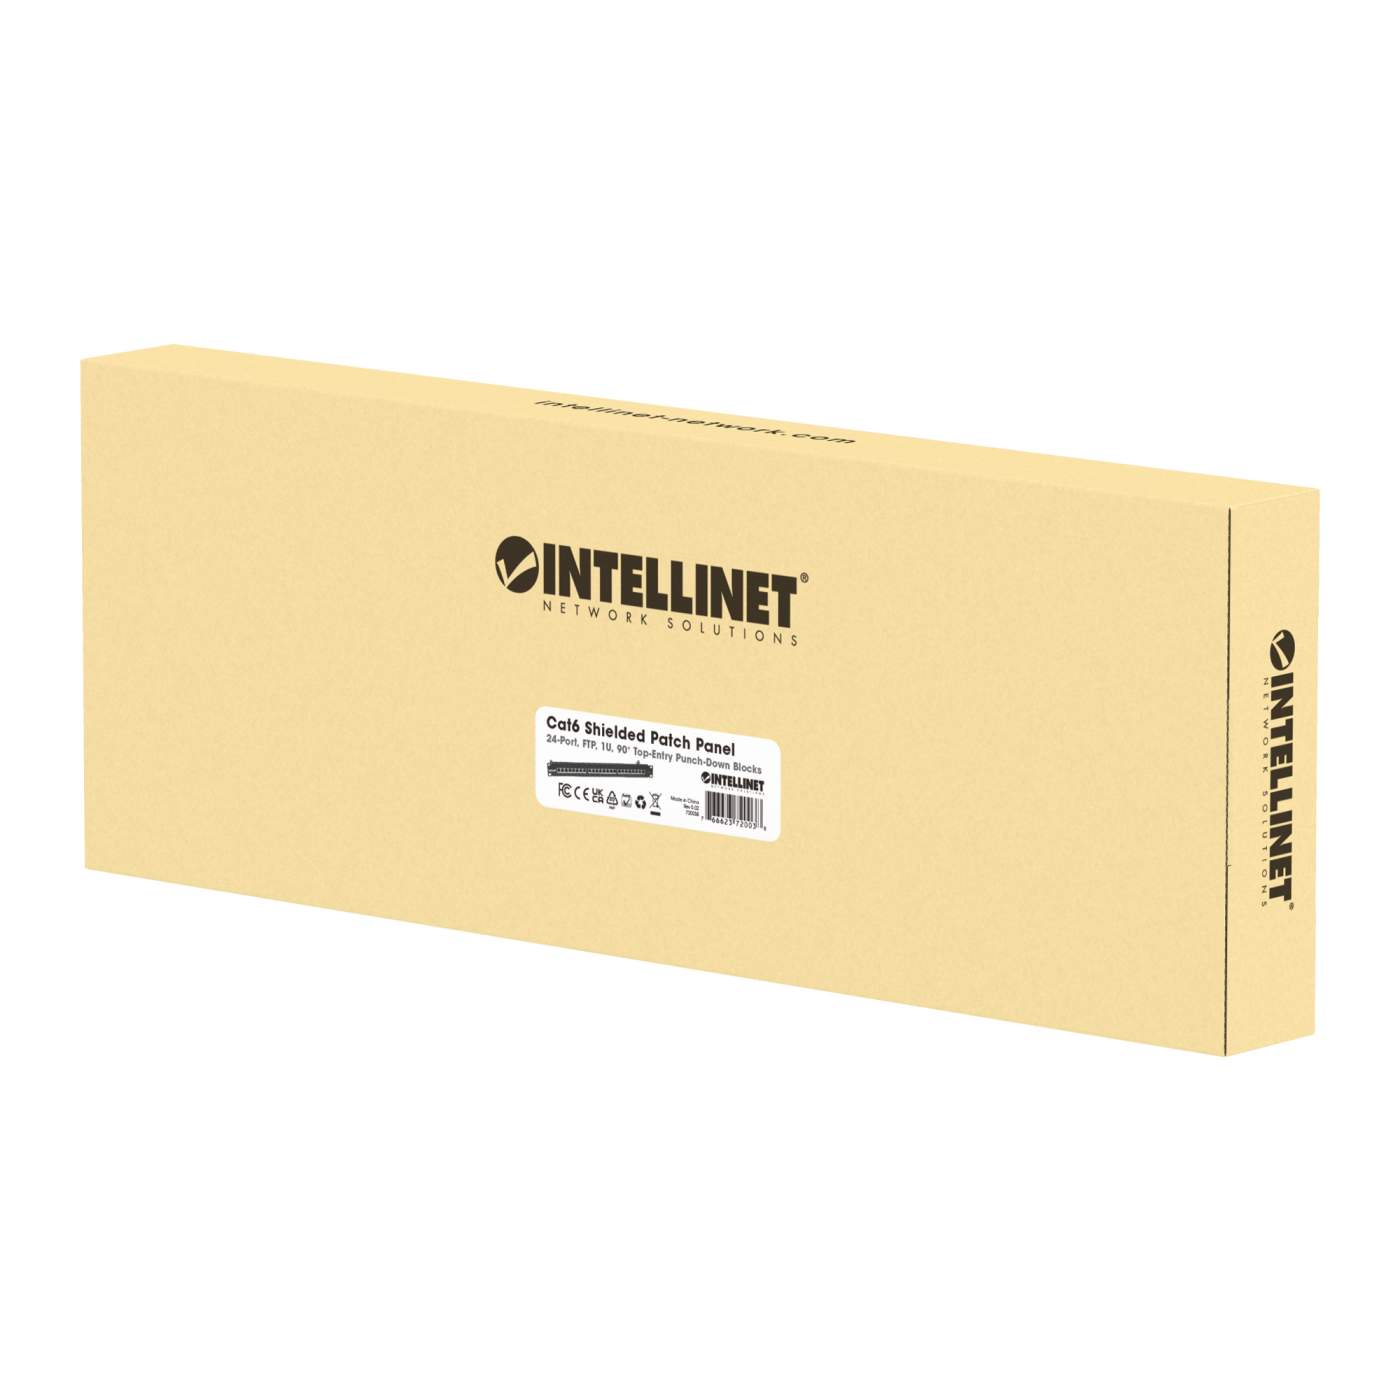 Cat6 Shielded Patch Panel Packaging Image 2